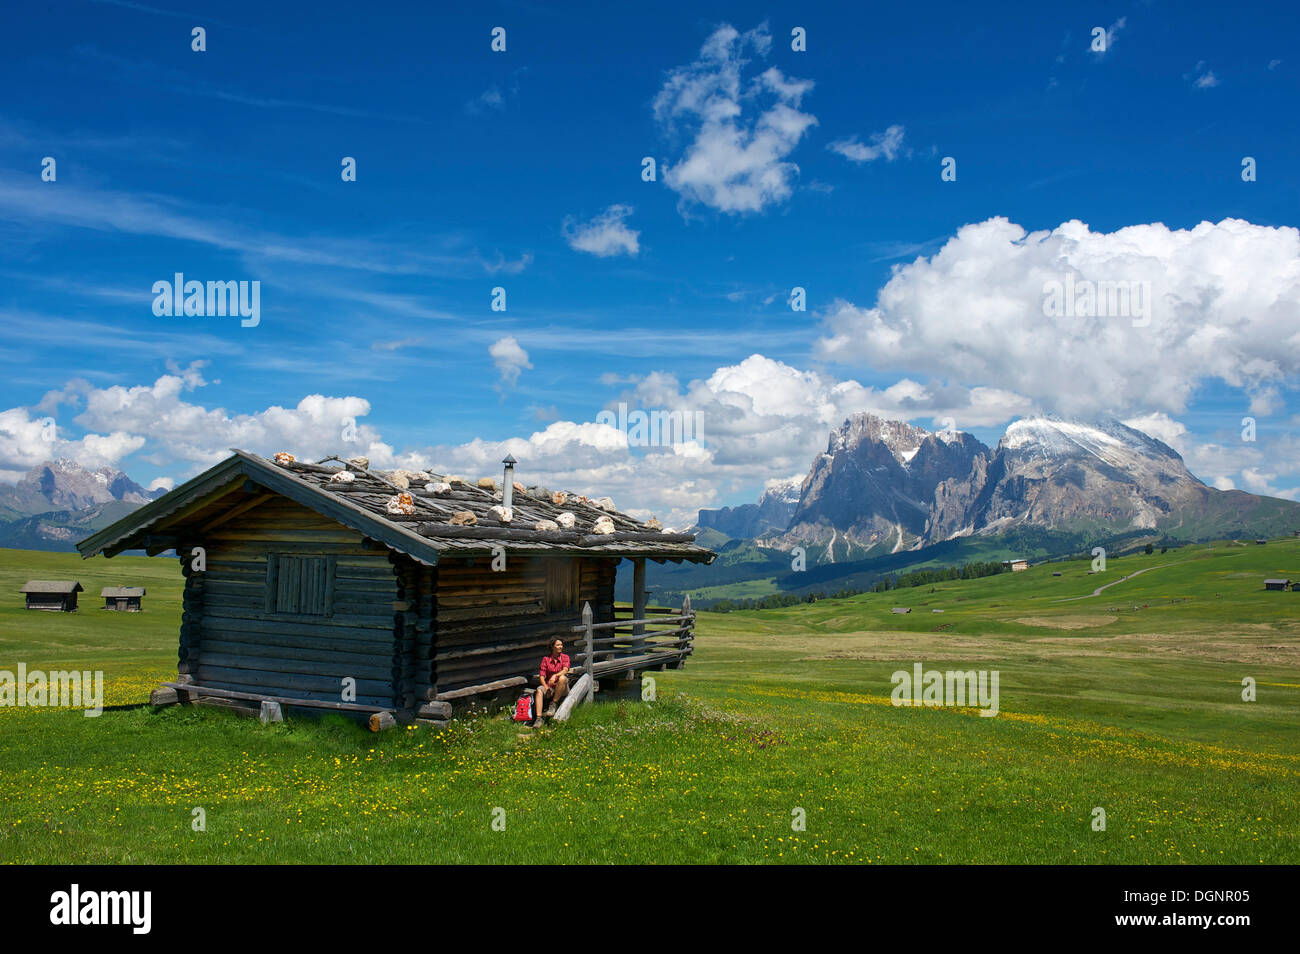 Woman sitting at an alpine hut in front of Piatto Mountain and Sasso Lungo Mountains, Seiser Alm, Dolomiten Stock Photo